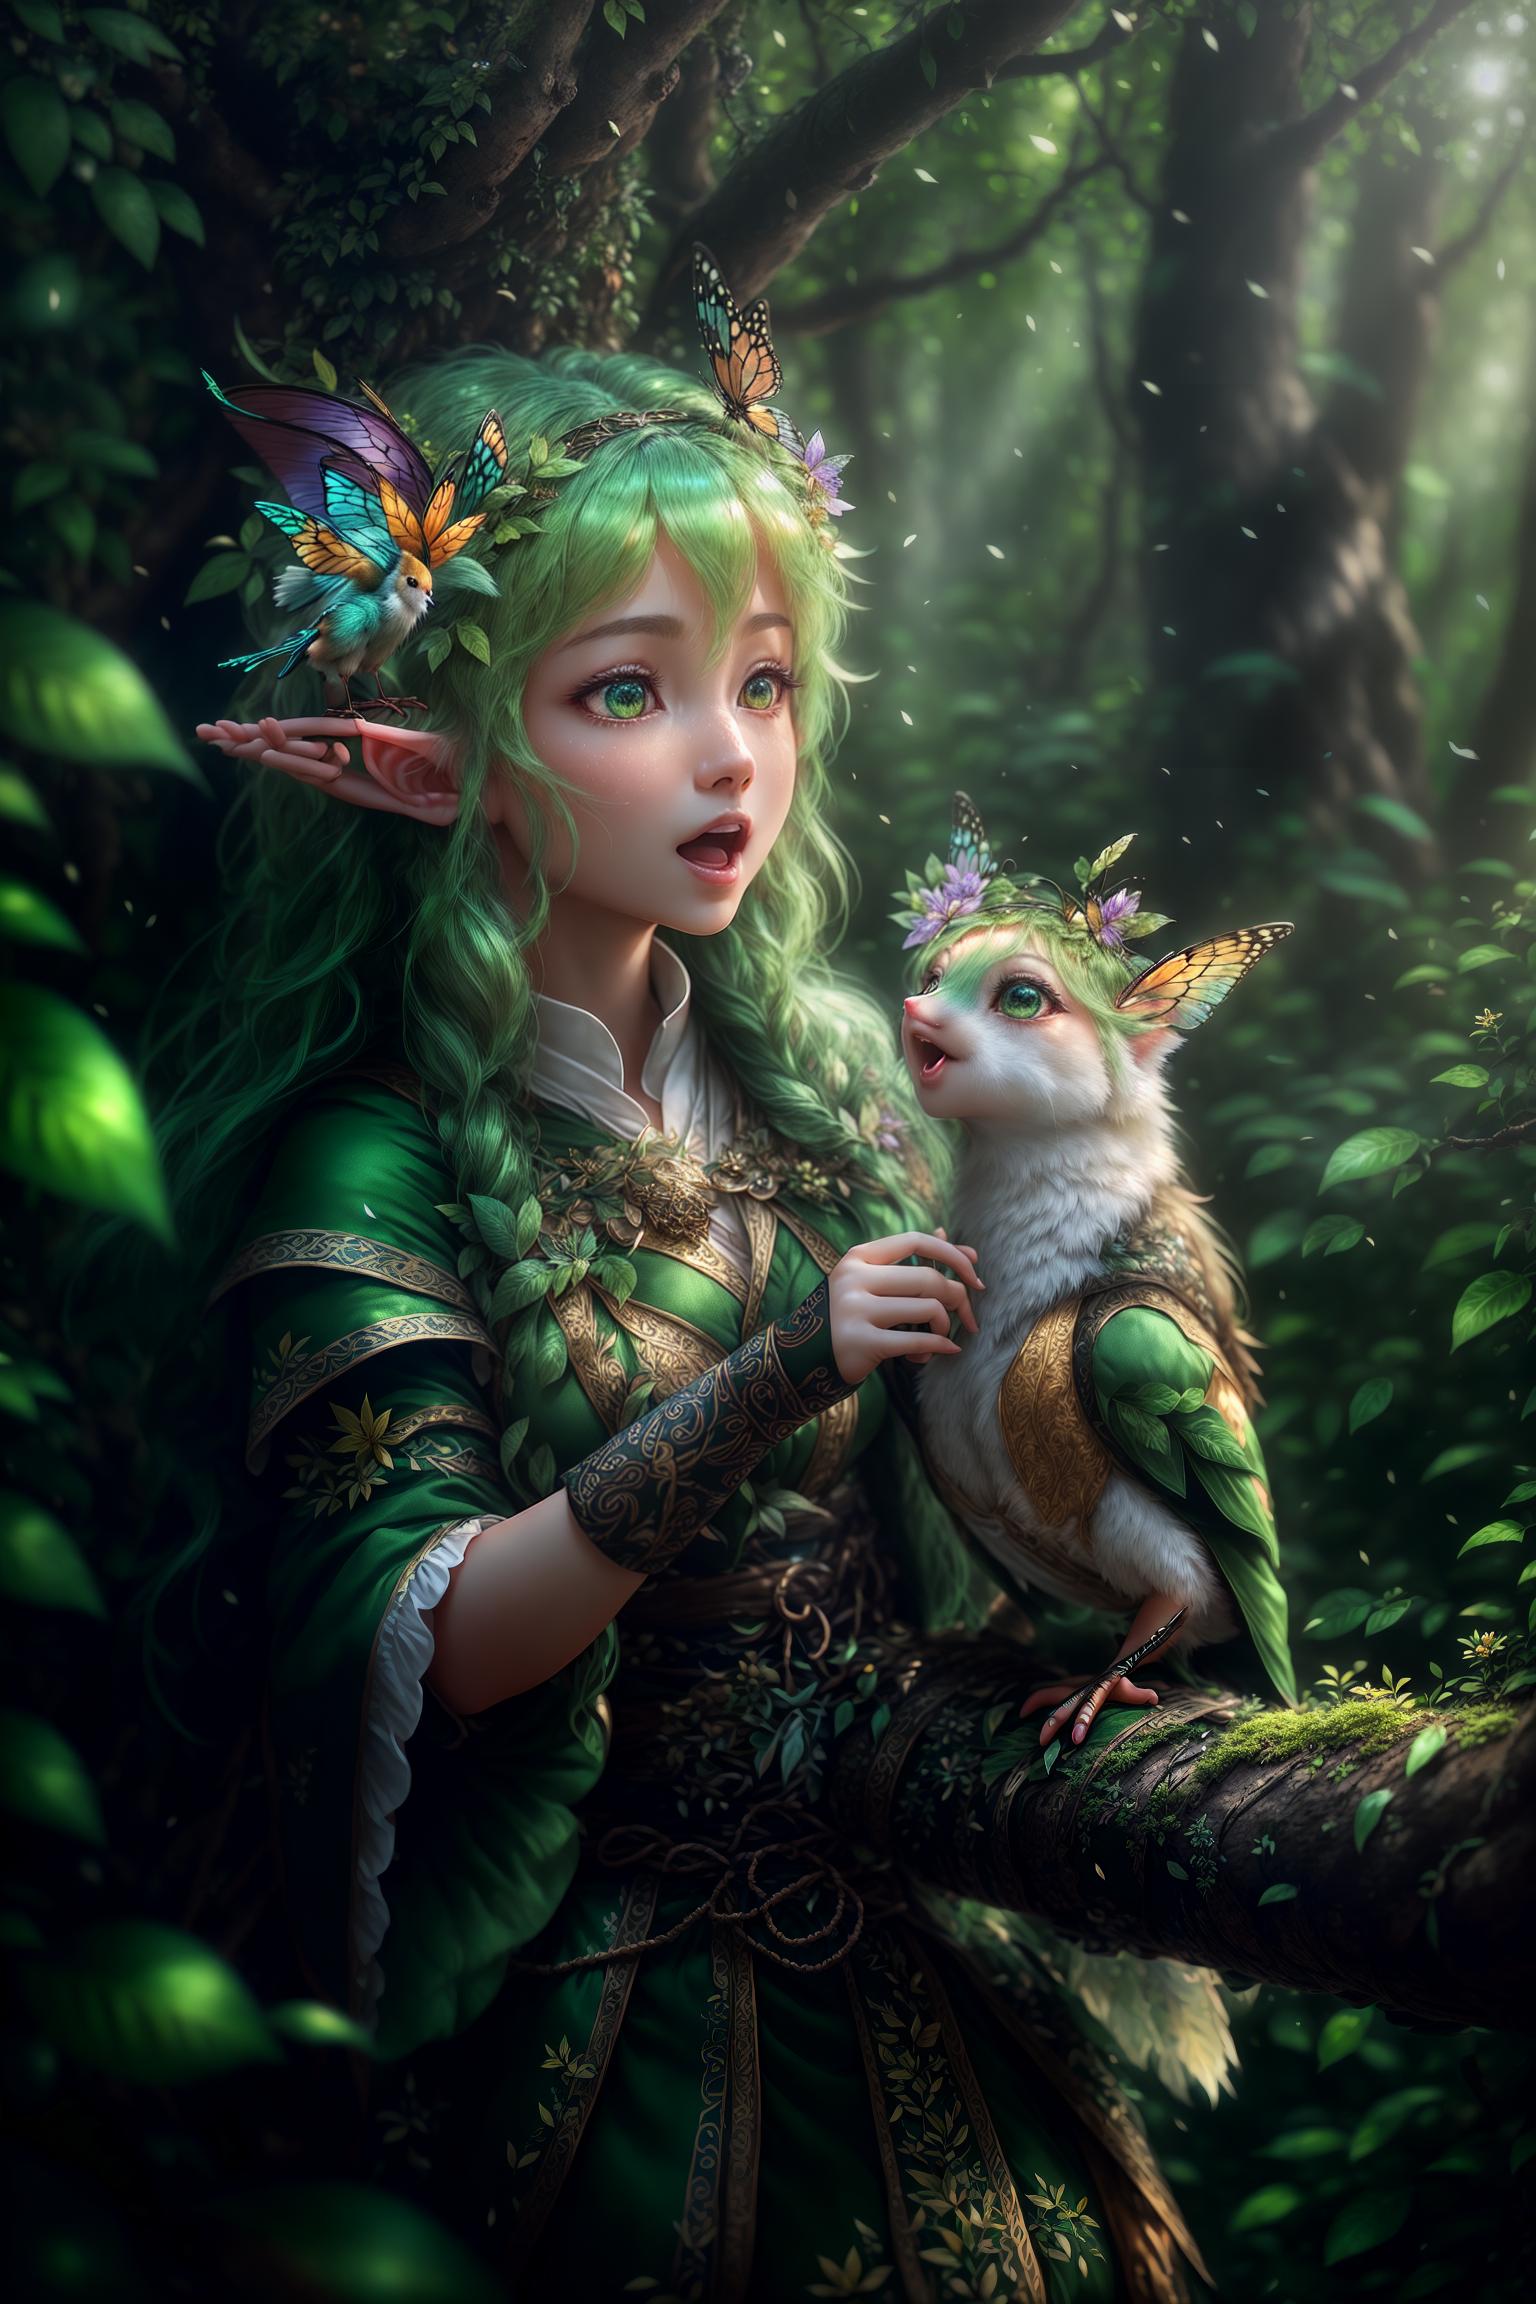  Aiko, (elf characteristics:1.2), (appears small, light, and full of vitality), (possesses transparent or semi transparent butterfly wings), (natural elements:1.0), (as a forest elf), (wearing clothing made of leaves and flowers), (weaving various wild flowers and grasses into her hair), (piercing scream:1.0), (depicting an open mouth and excited expression), (highlighting her powerful and soul shaking vocal abilities), (close to nature:1.0), (a bird perched on her hand), (interacting with small animals), (indicating a close connection with the natural world), (deep forest:1.2), (main scene is a dark and mysterious forest), (filled with towering swaying trees), (winding paths), (thick moss covering the ground), (active trees:1.0), (adding el hyperrealistic, full body, detailed clothing, highly detailed, cinematic lighting, stunningly beautiful, intricate, sharp focus, f/1. 8, 85mm, (centered image composition), (professionally color graded), ((bright soft diffused light)), volumetric fog, trending on instagram, trending on tumblr, HDR 4K, 8K